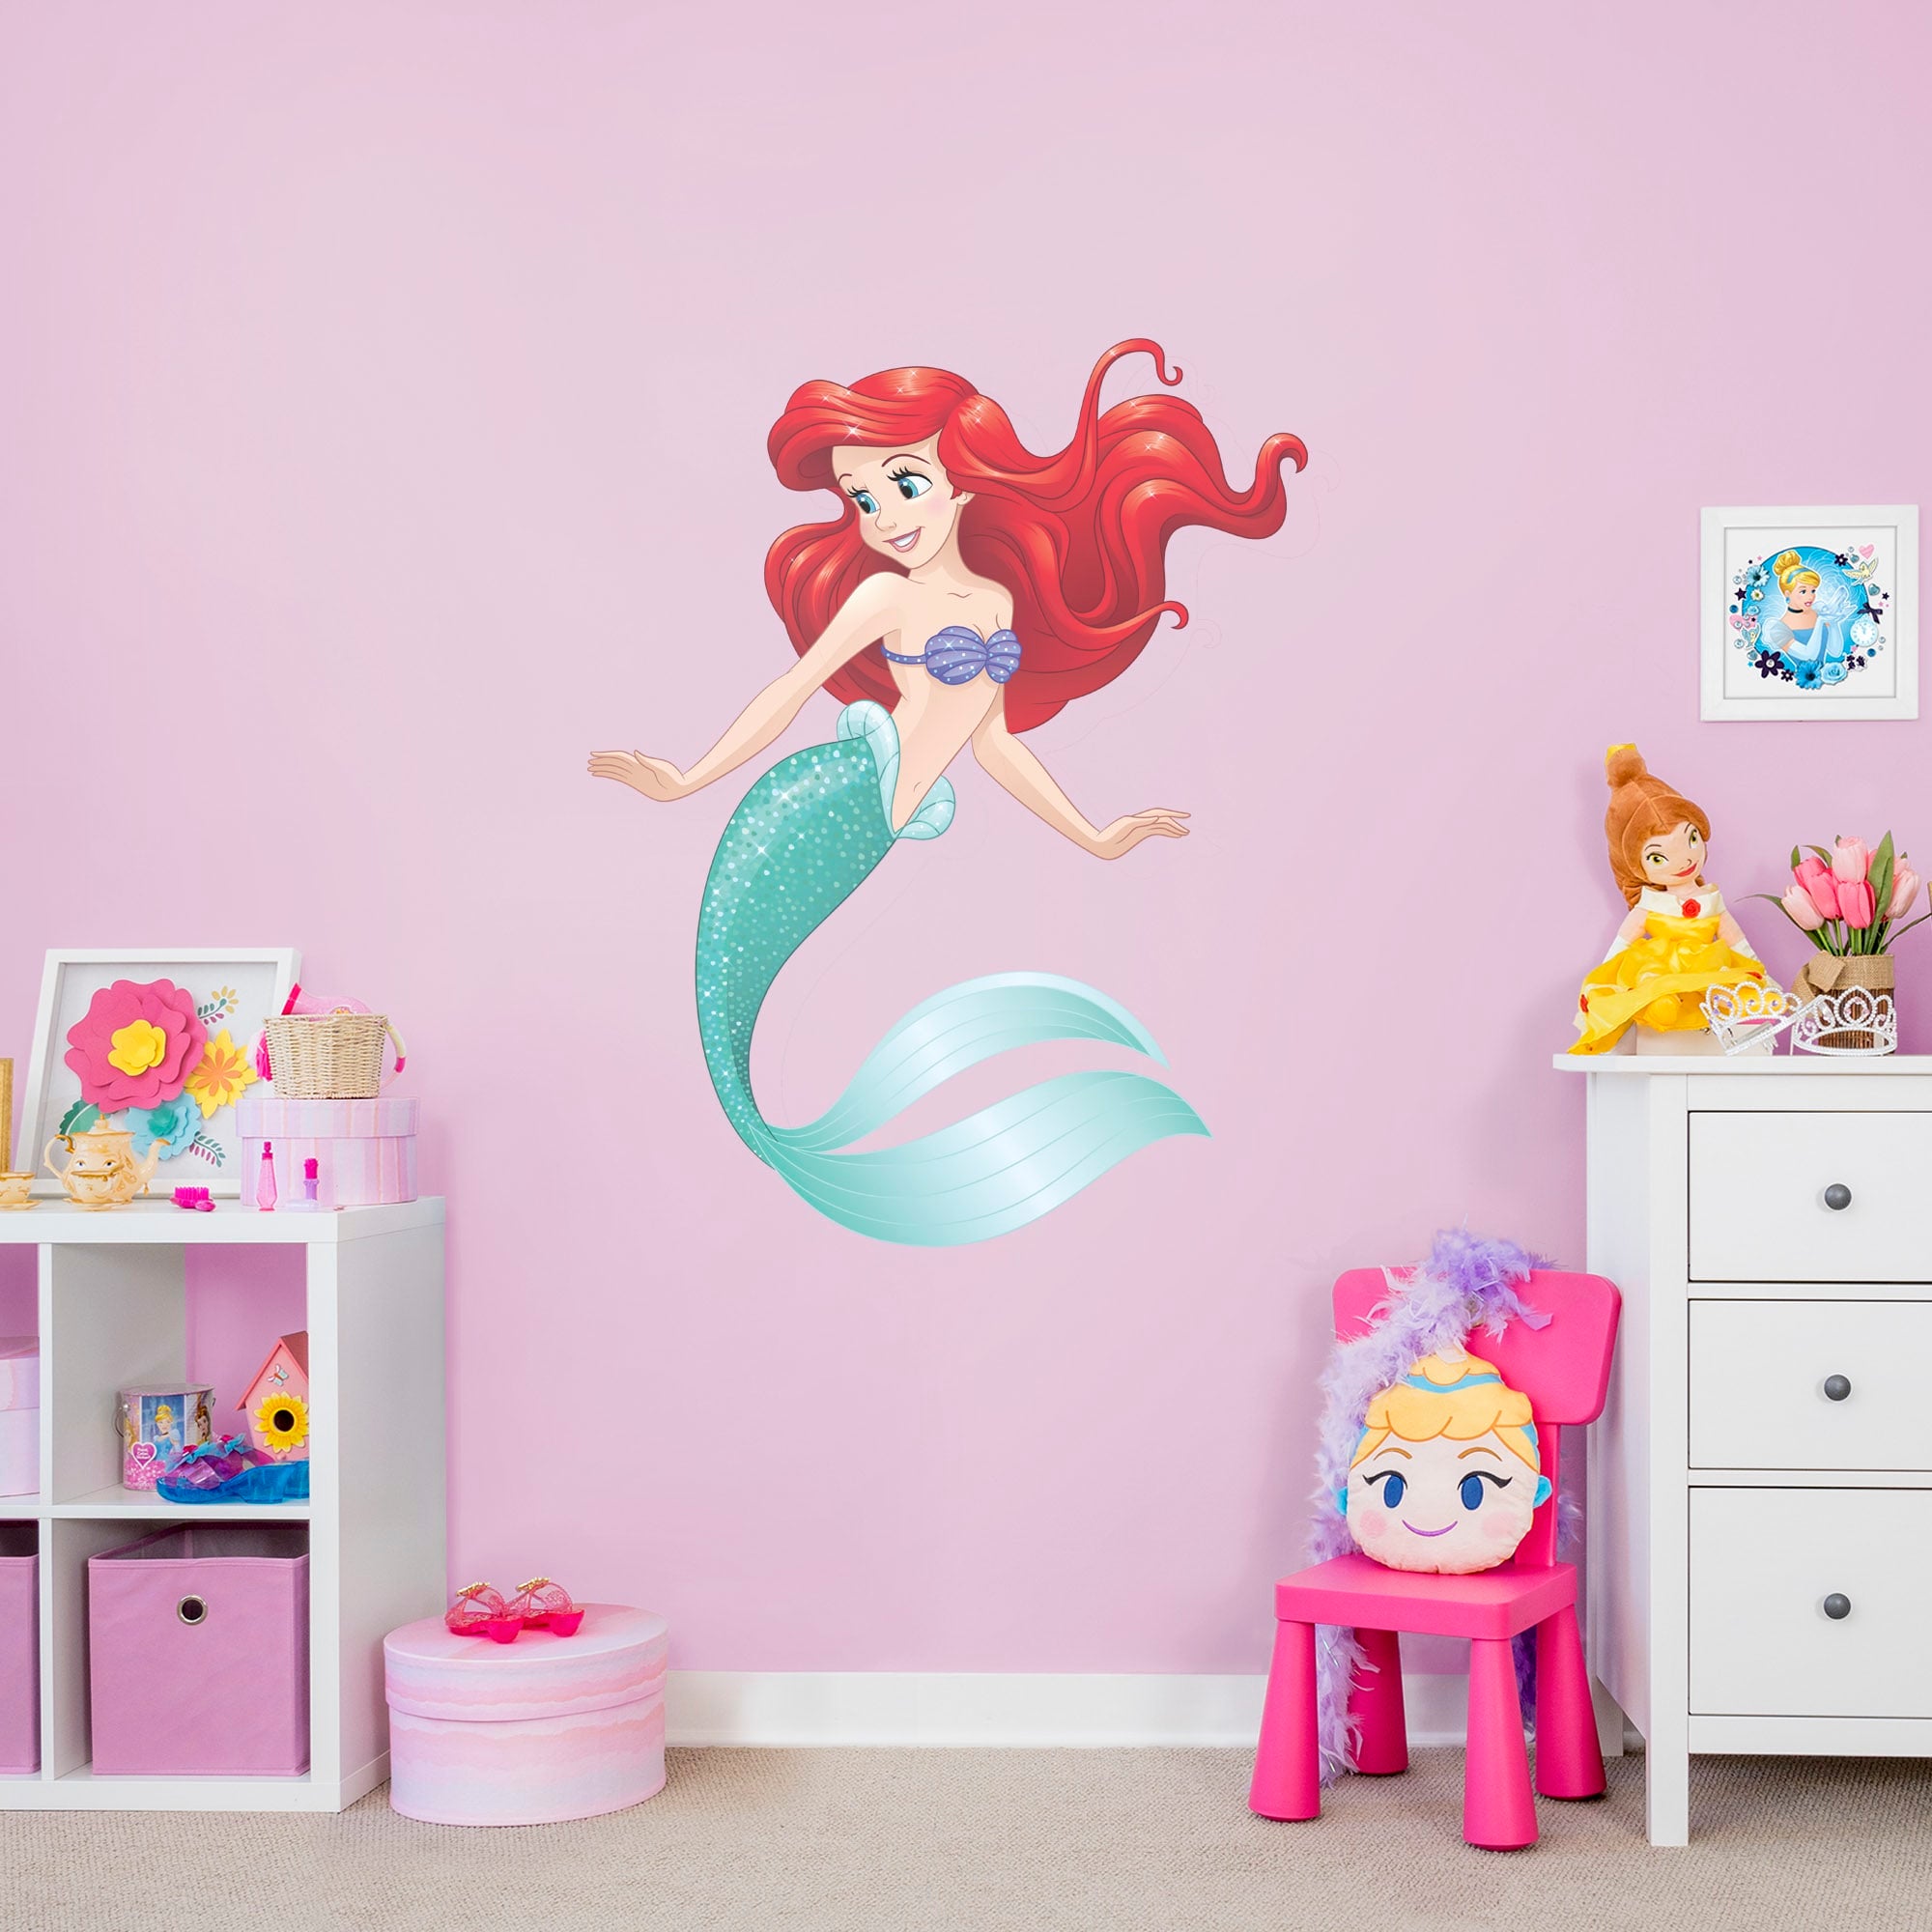 The Little Mermaid: Ariel and Friends - Officially Licensed Disney Removable Wall Decals Giant Character + 3 Decals (38"W x 48"H